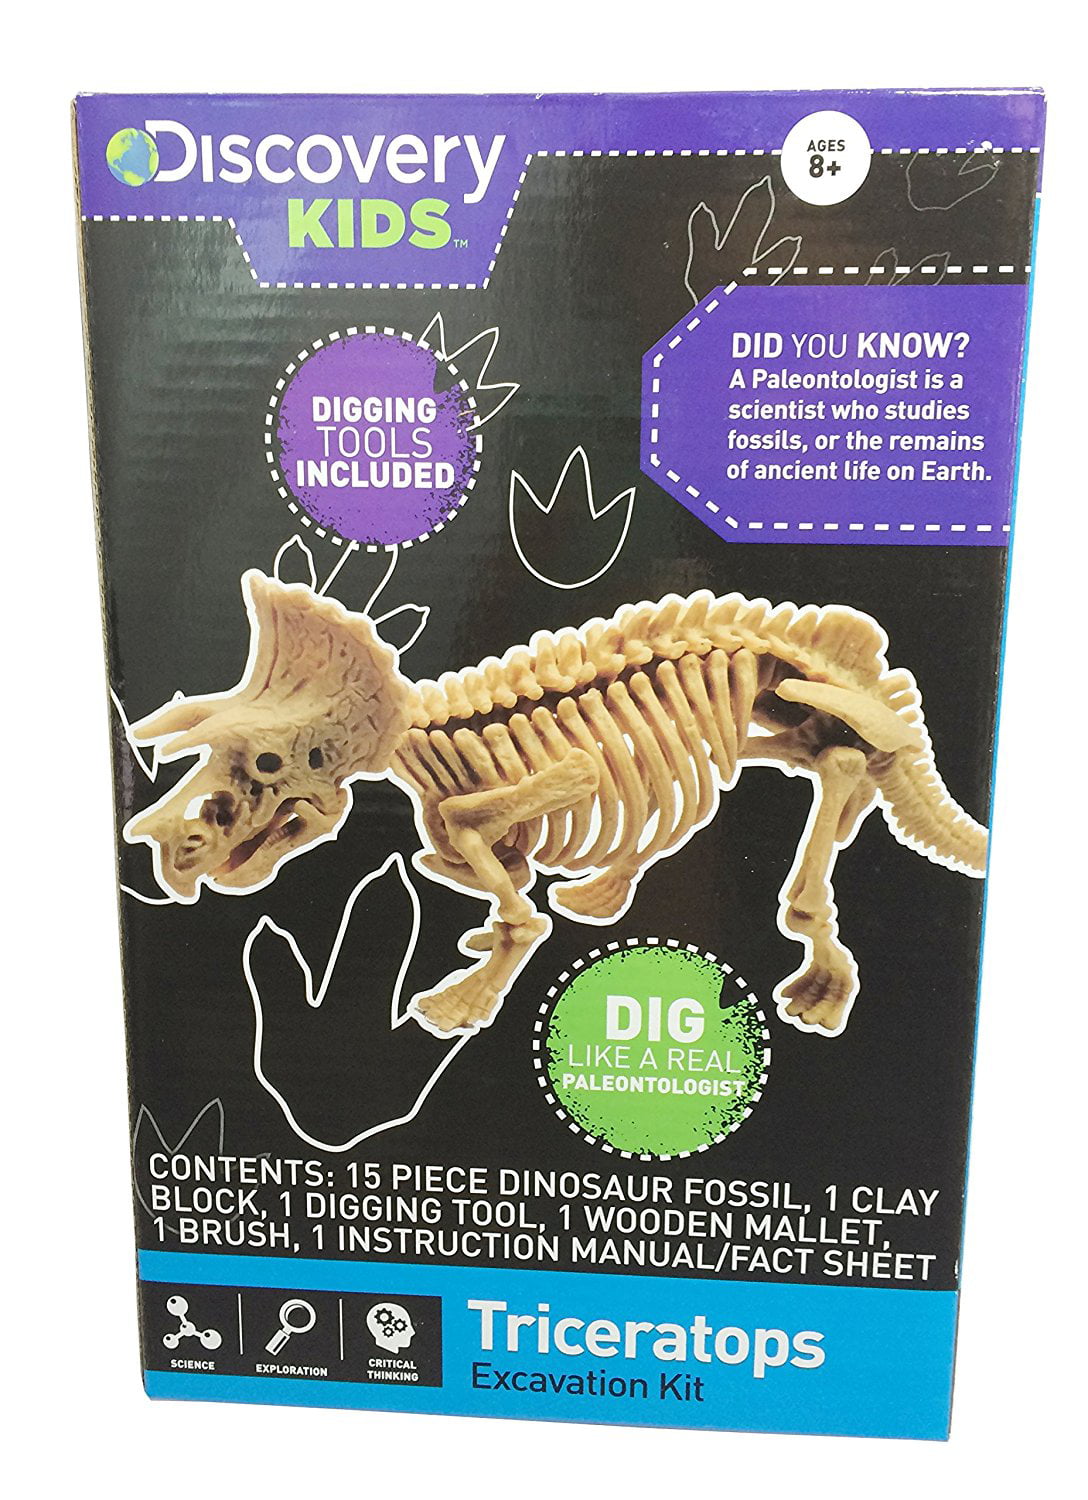 Details about   Dinosaur Excavation Kit Entertains Kids Ages 6 Discover 3 Dino Fossils NEW 